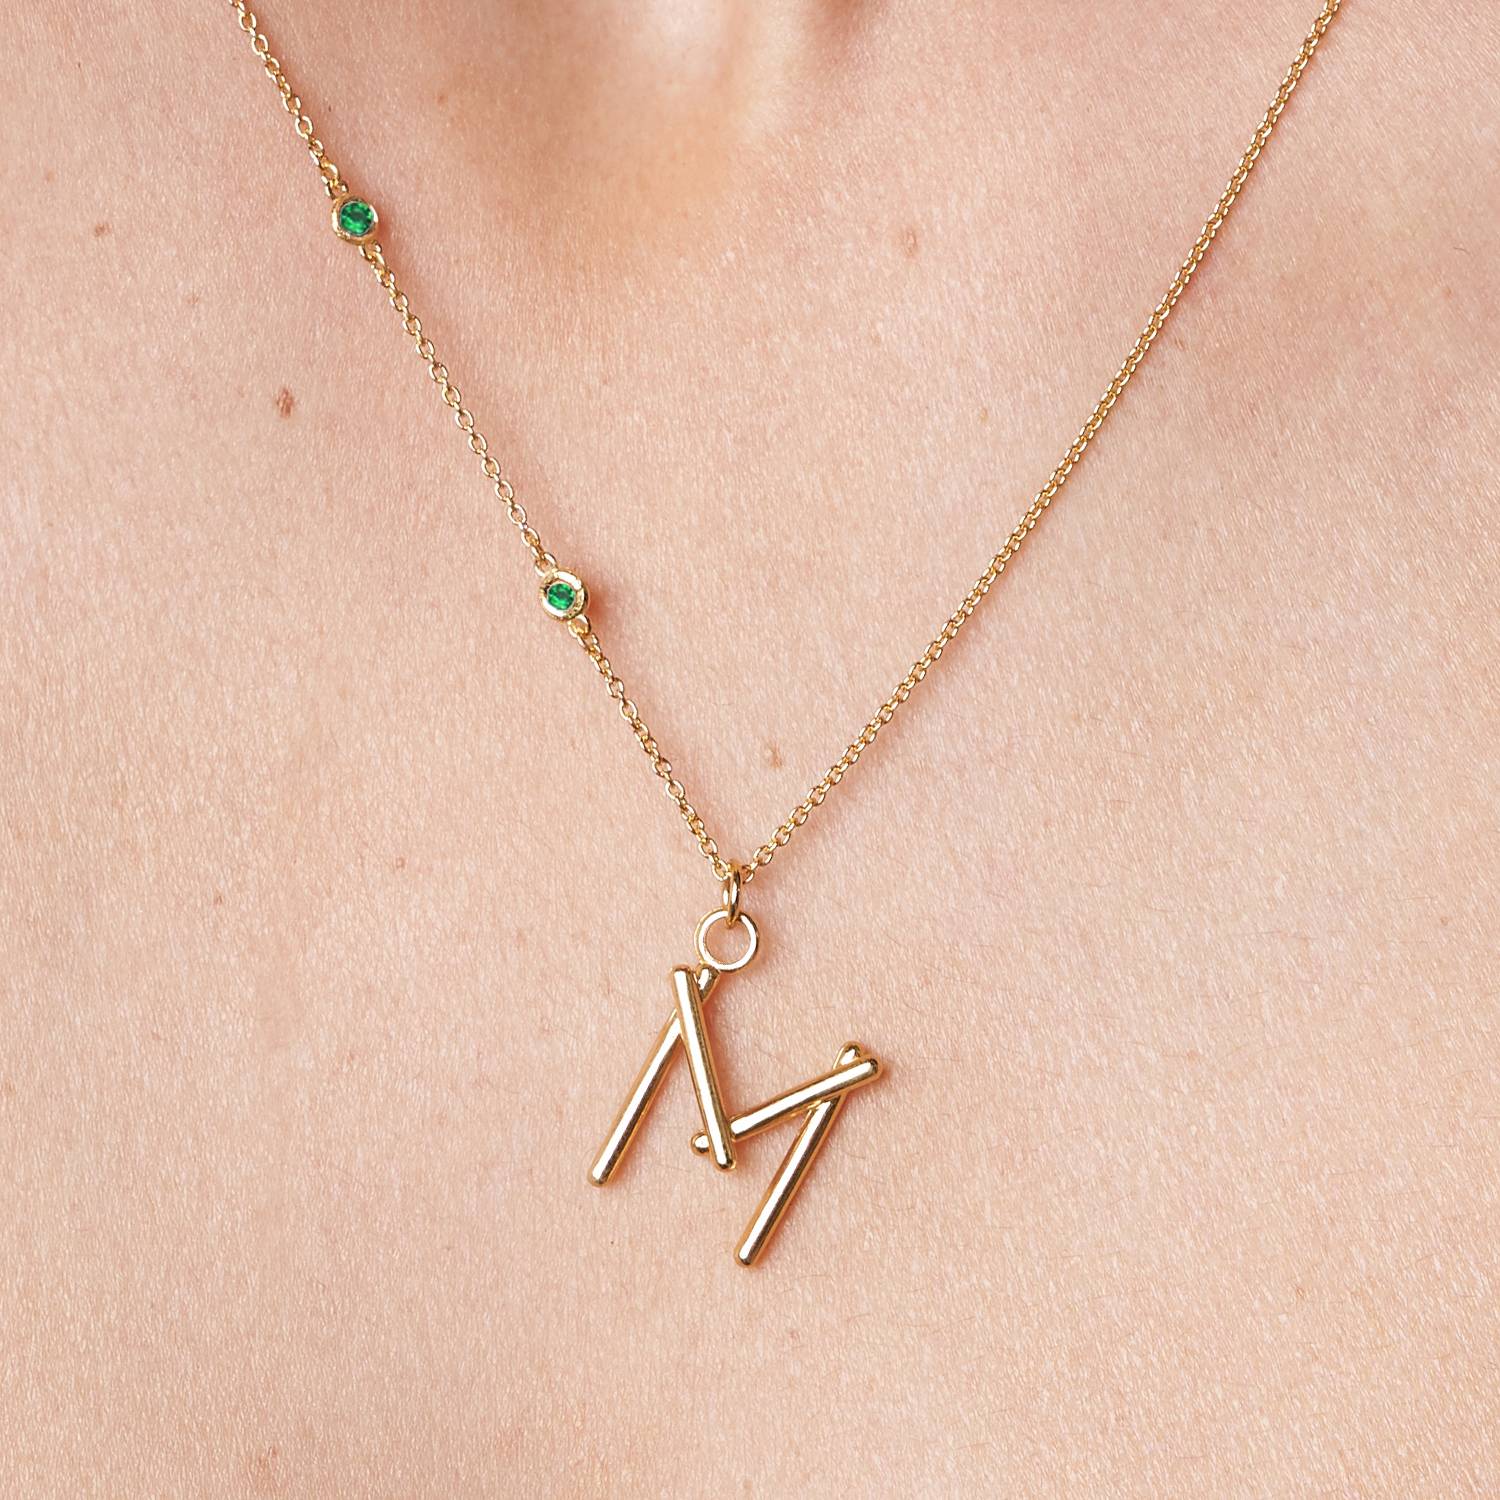 Matchstick Initial Necklace with Green Emerald - Gold Vermeil-1 product photo